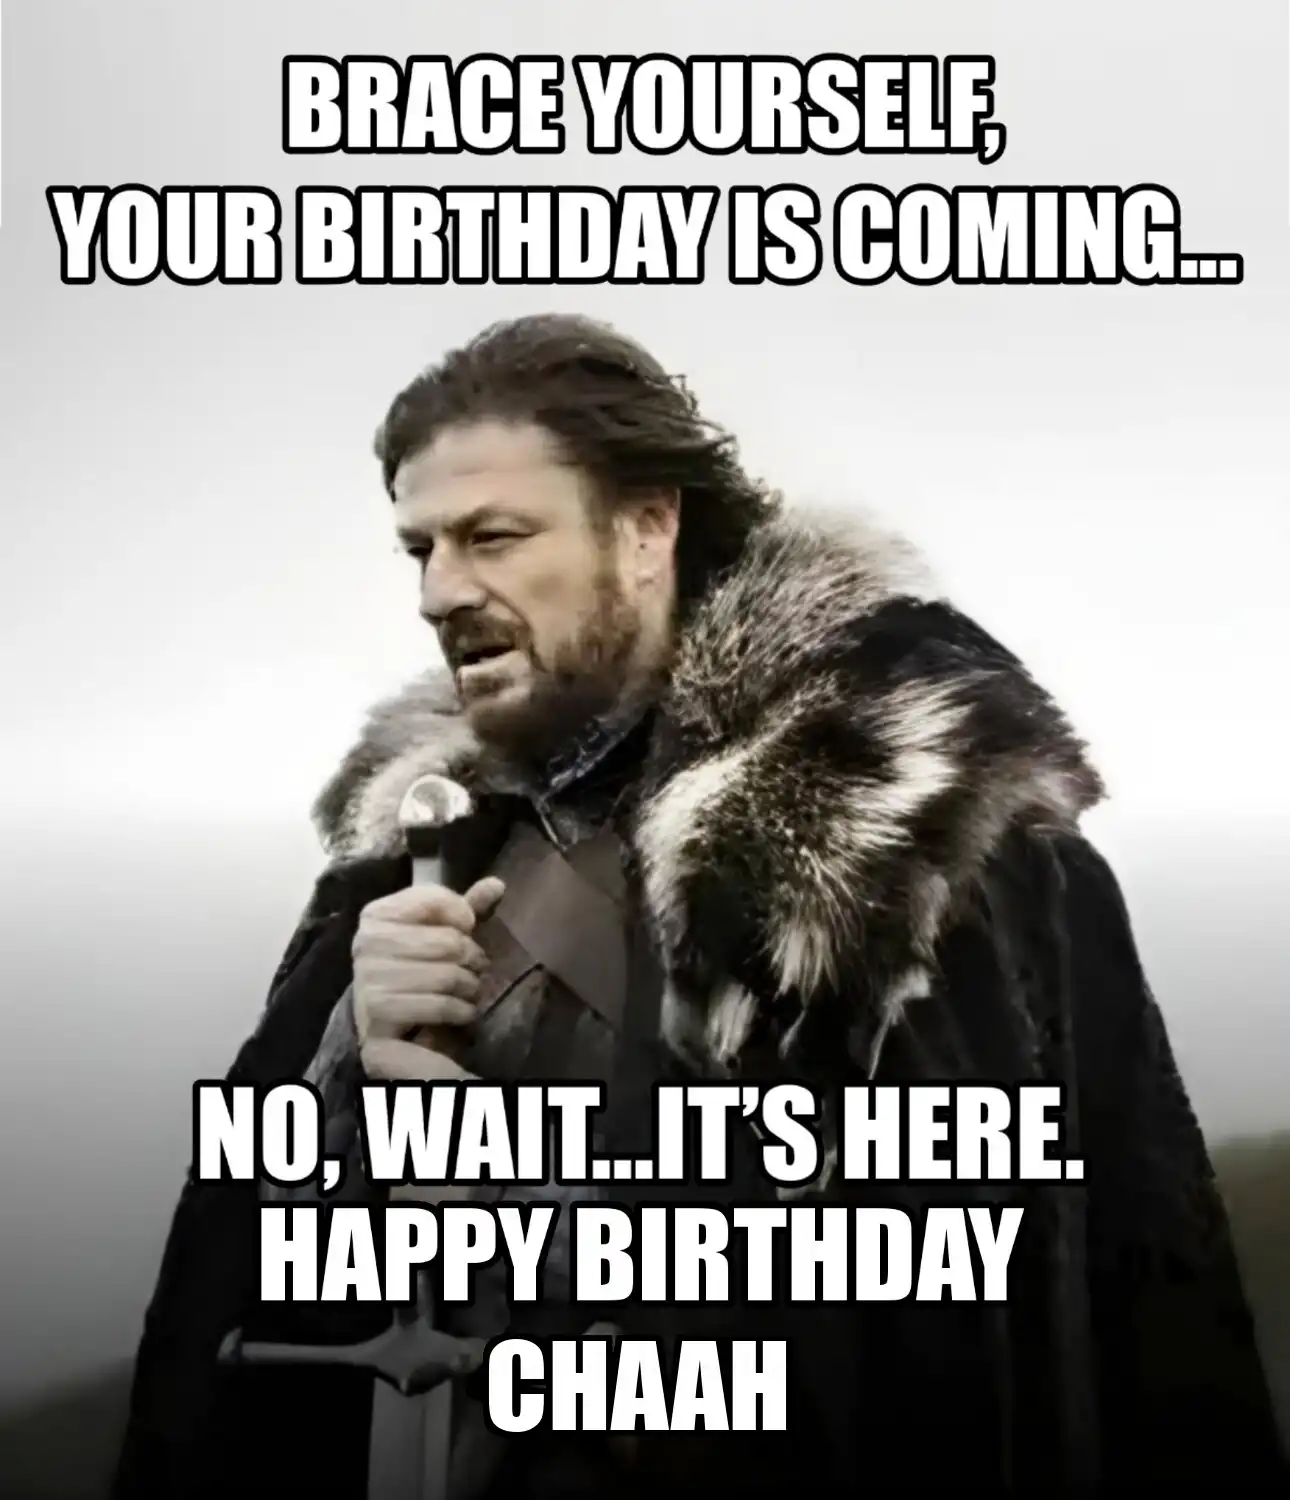 Happy Birthday Chaah Brace Yourself Your Birthday Is Coming Meme